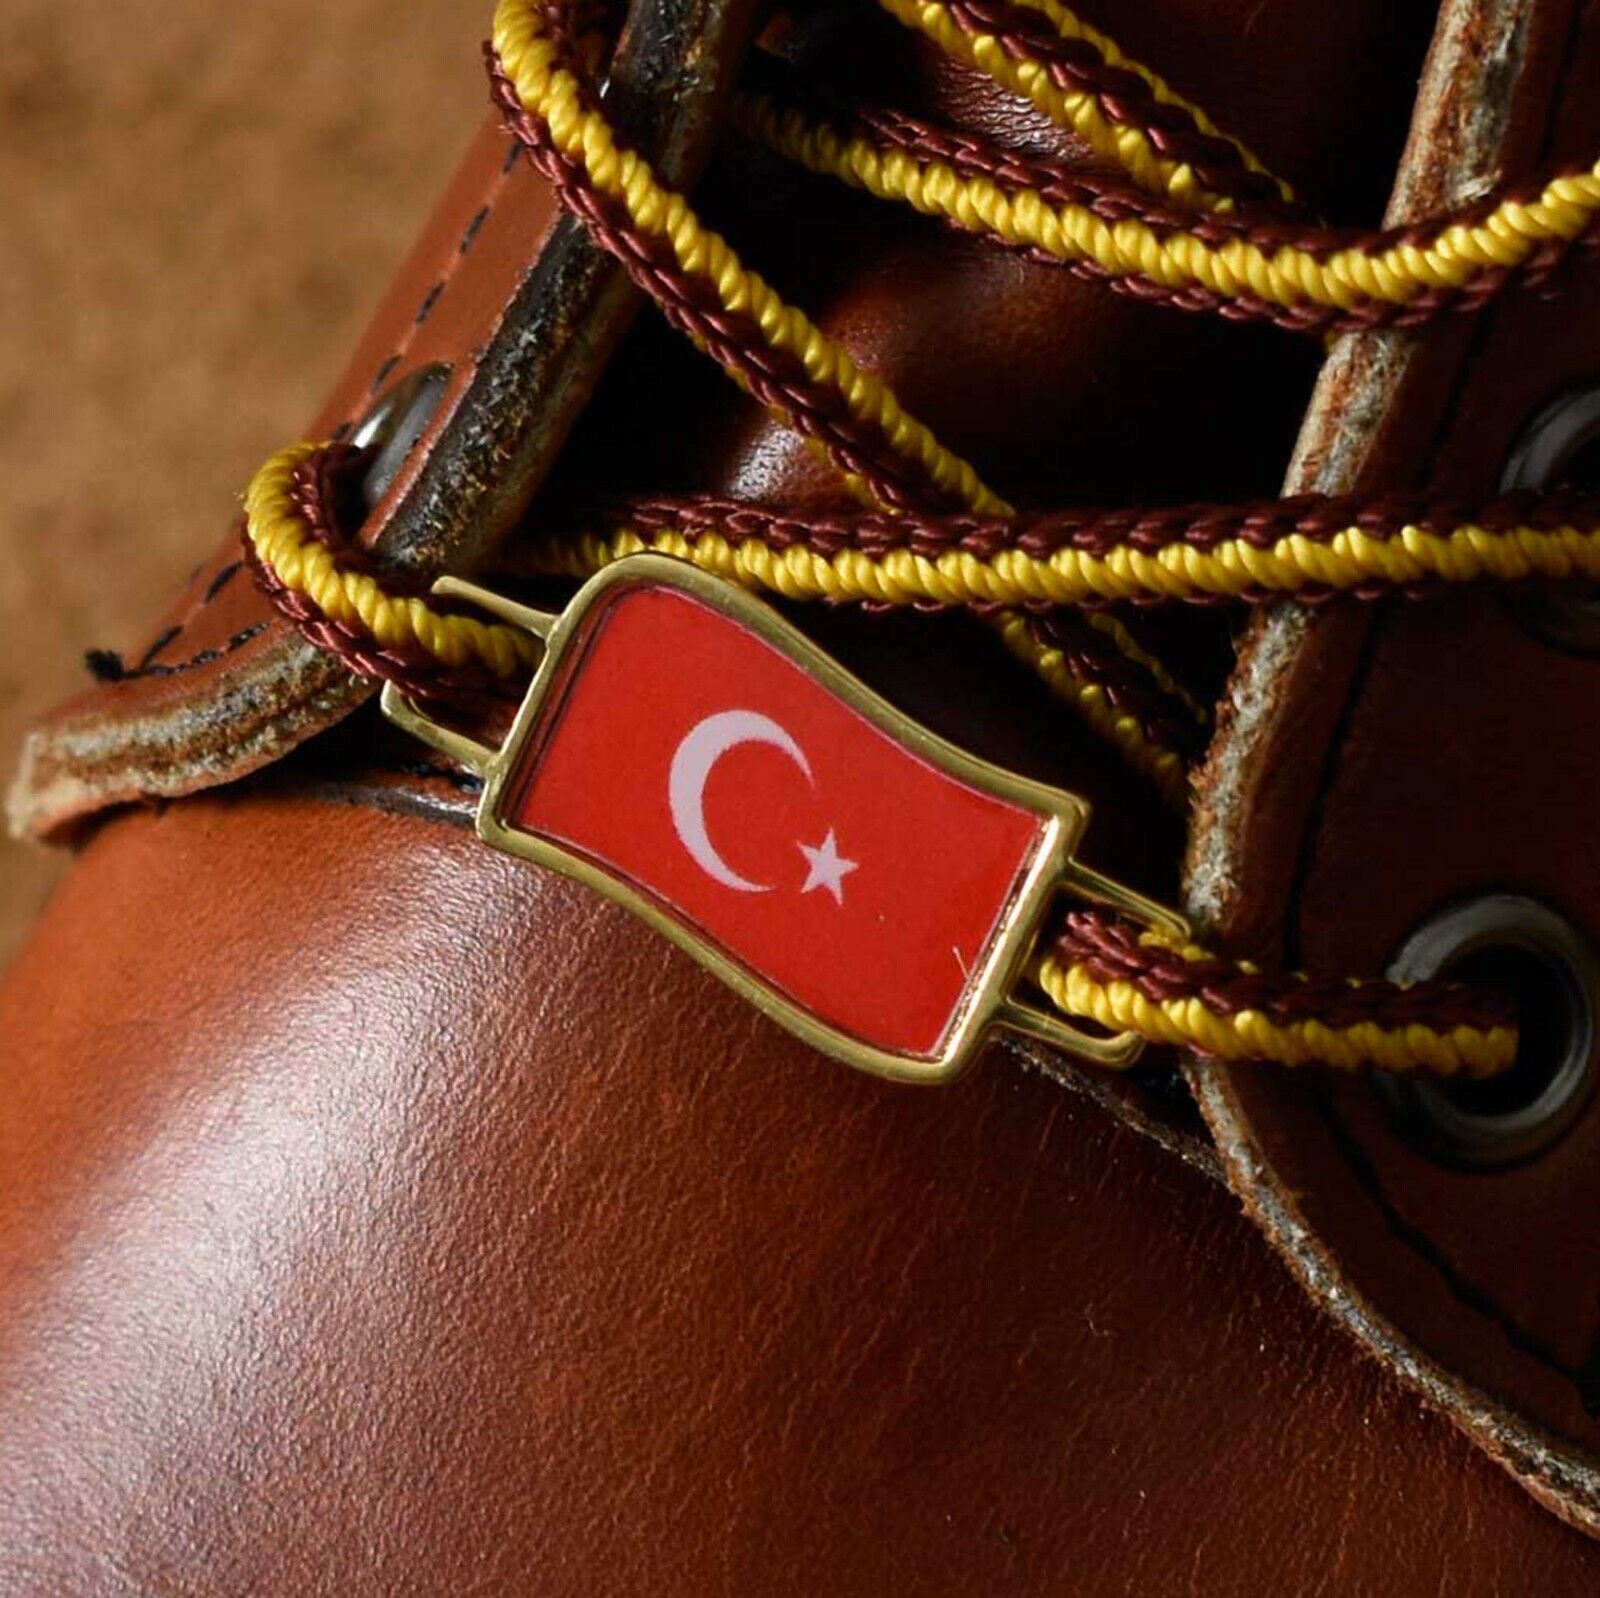 Turkey Flags Shoes Boot Shoelace Keeper Holder Charm BrooklynMaker